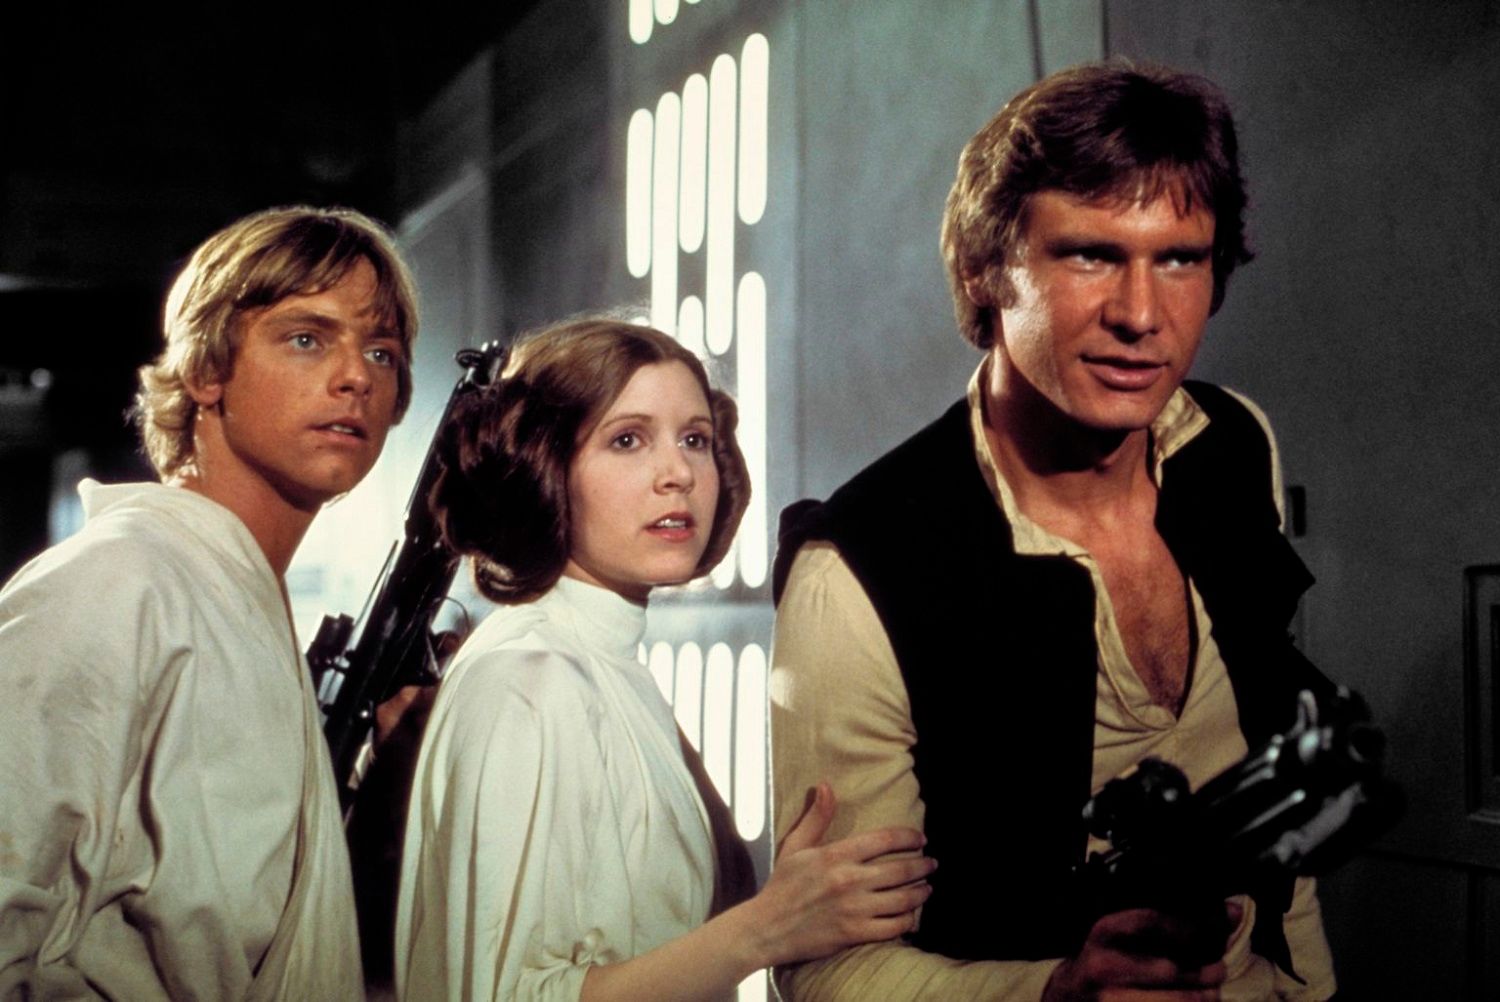 Star Wars: Every Movie And Show On Disney+, Ranked (According To IMDb)